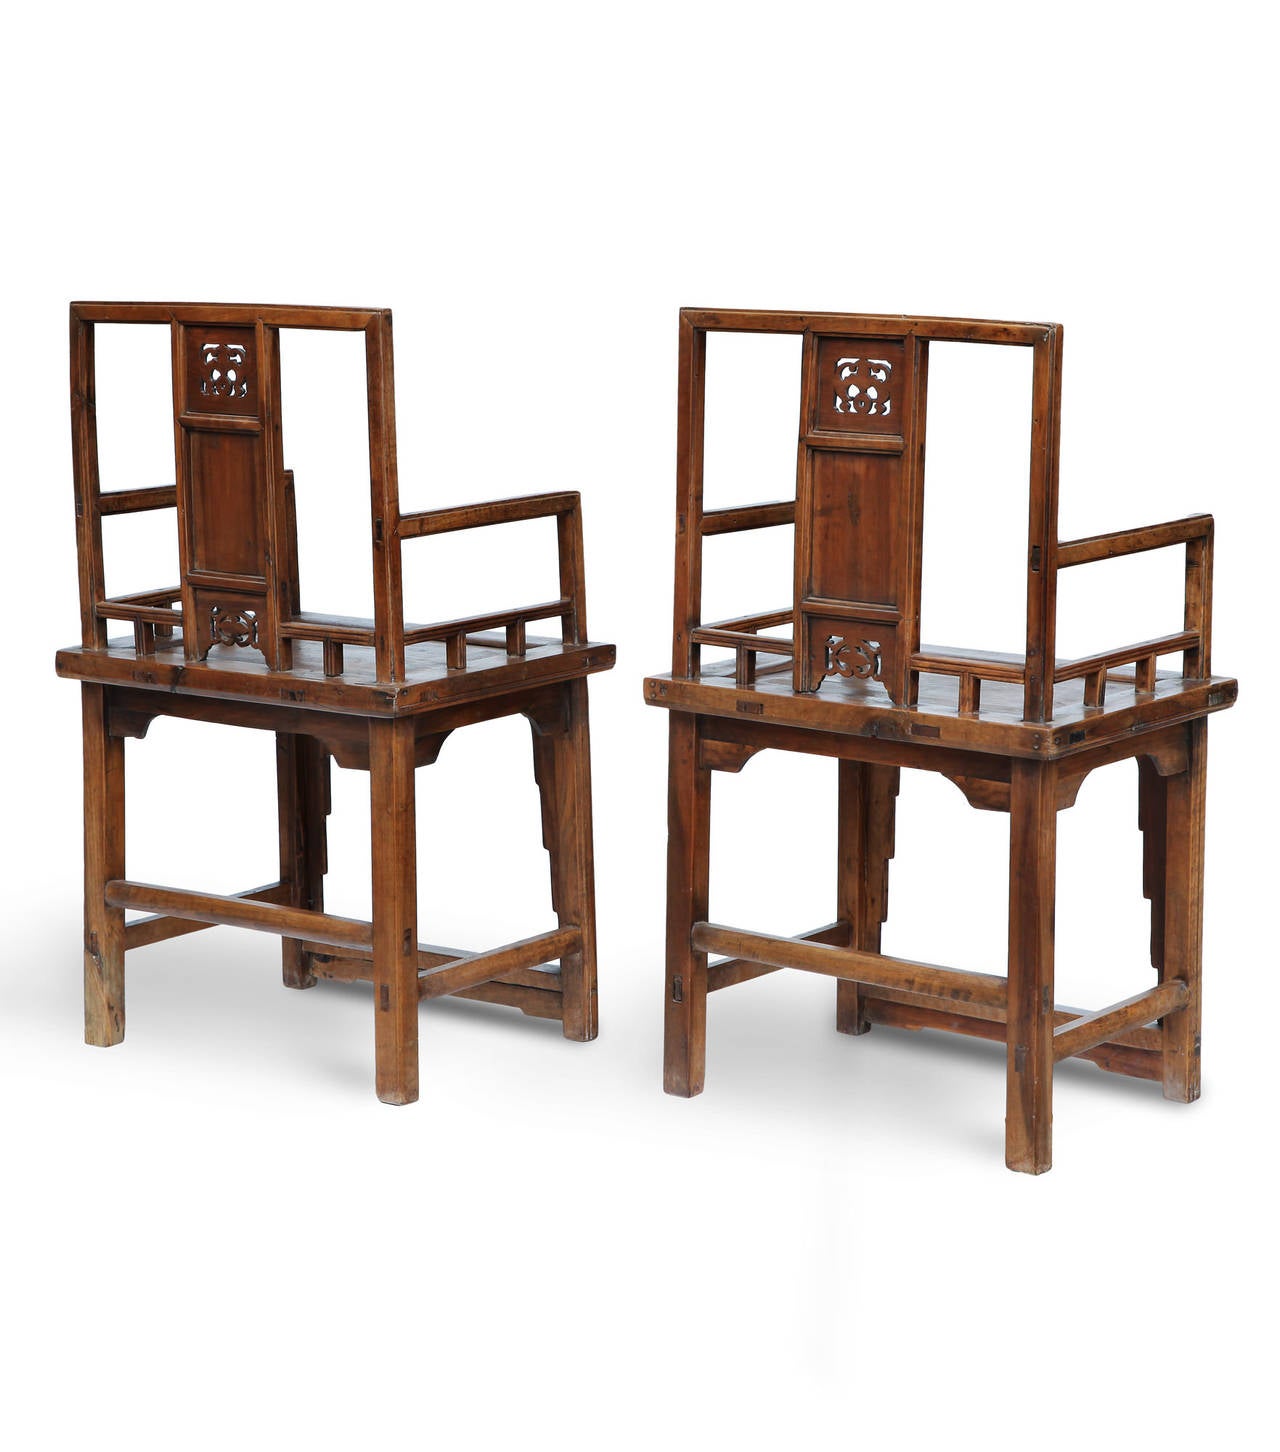 Pair of antique chairs made of camphor wood, a rare and precious material. 
At the center of the back there is an elaborate frieze full of meaning: a bat holds an amulet, symbol of good luck. Is finely carved also the endless knot which symbolized